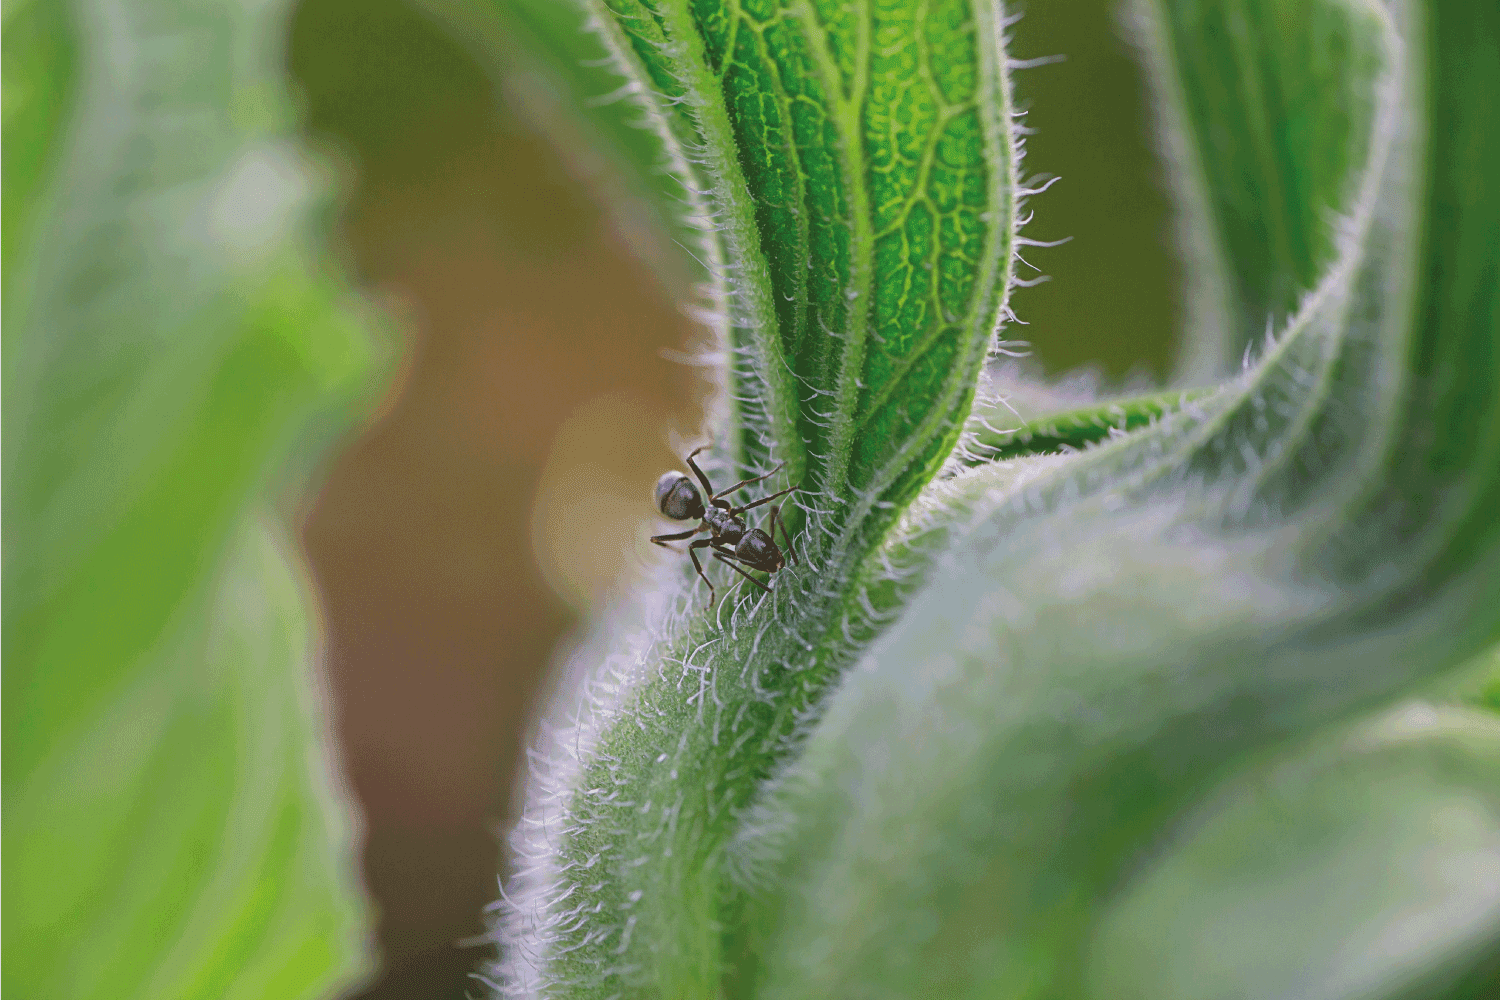 odorous house ant on the leaf of a sunflower